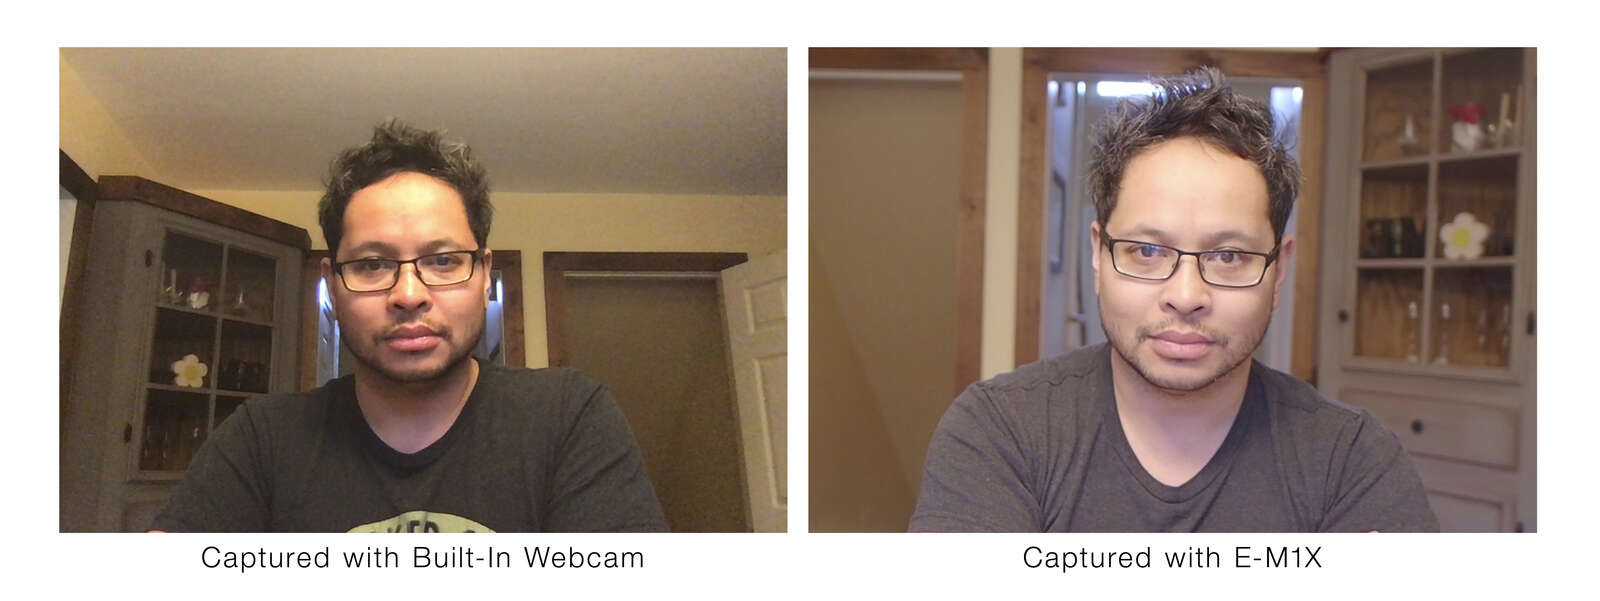 What Is a Webcam? Here's What You Need to Know